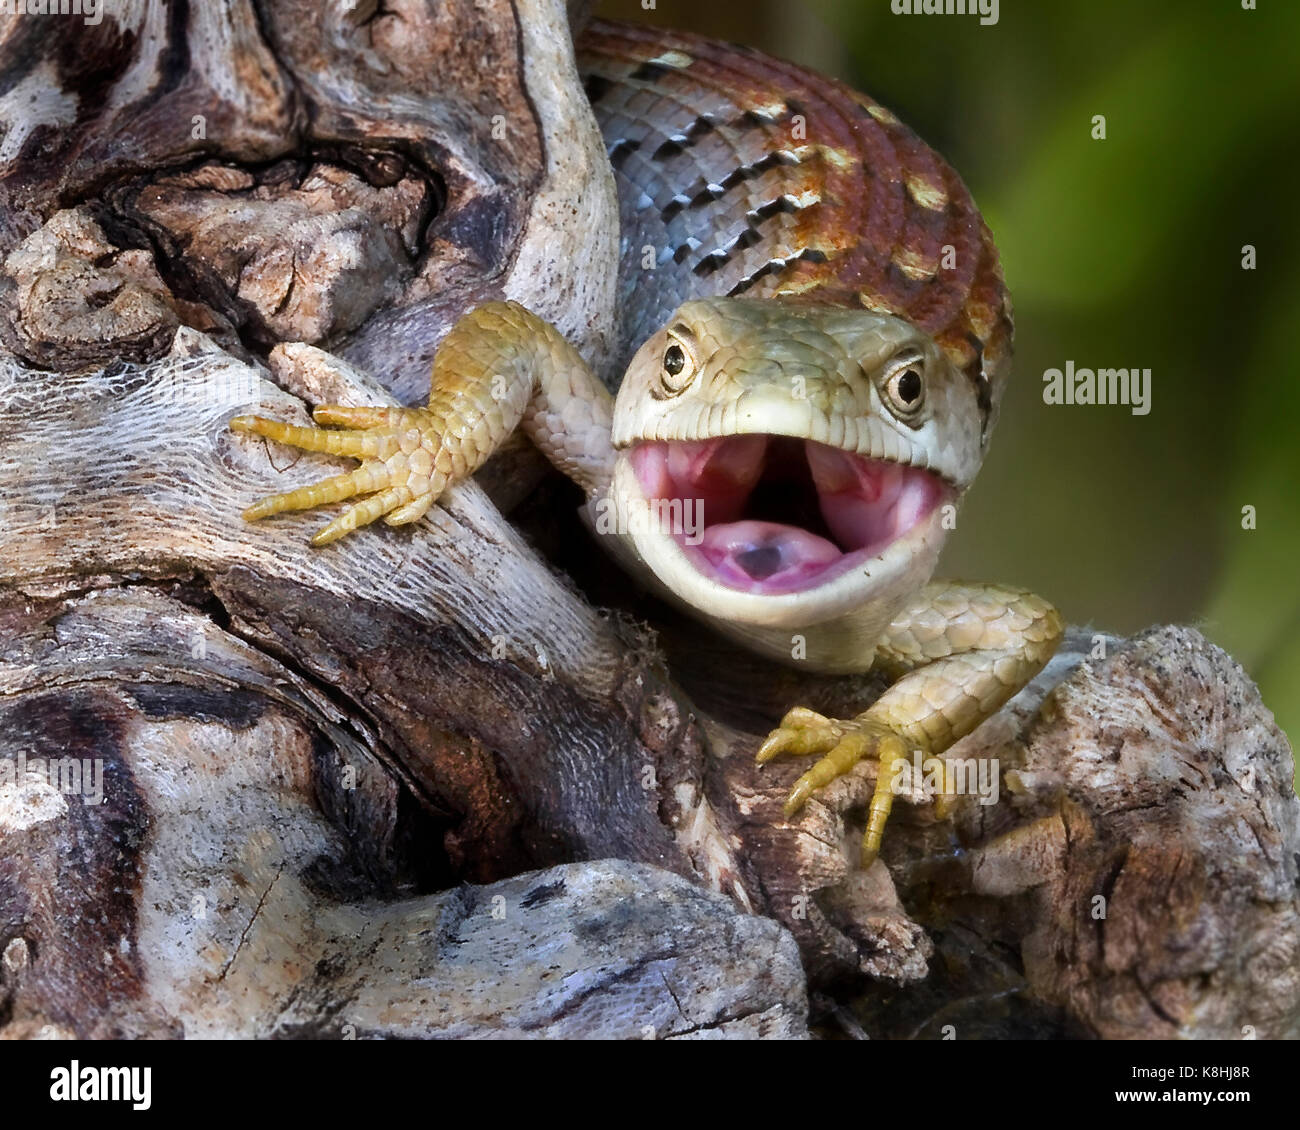 lizard with mouth open,alligator lizard as a threat Stock Photo